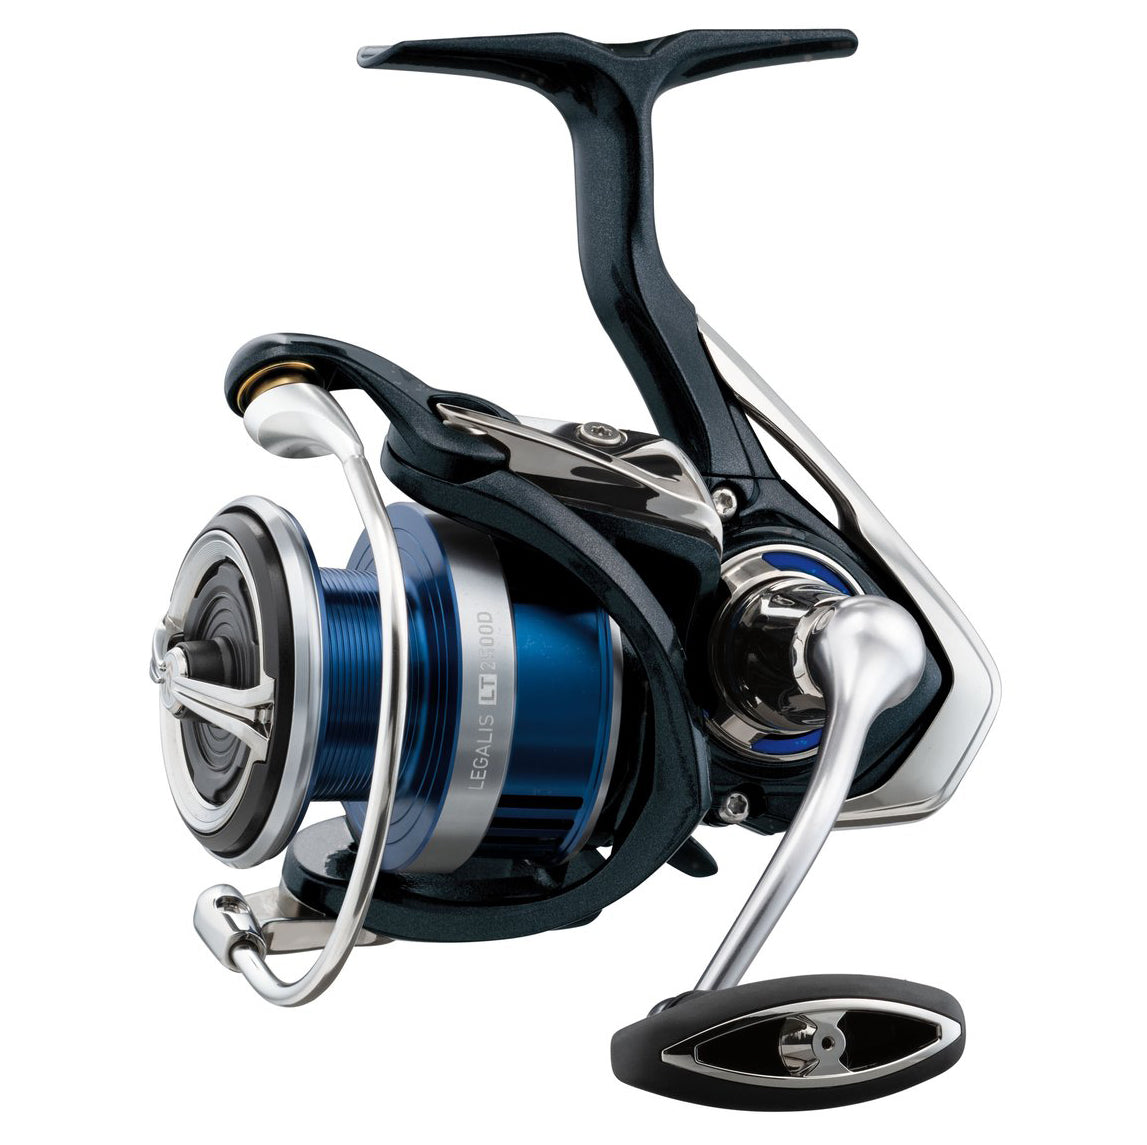 ONE3 13 Fishing Creed GT 4000 Gear Ratio 6.2:1 Spinning Fishing